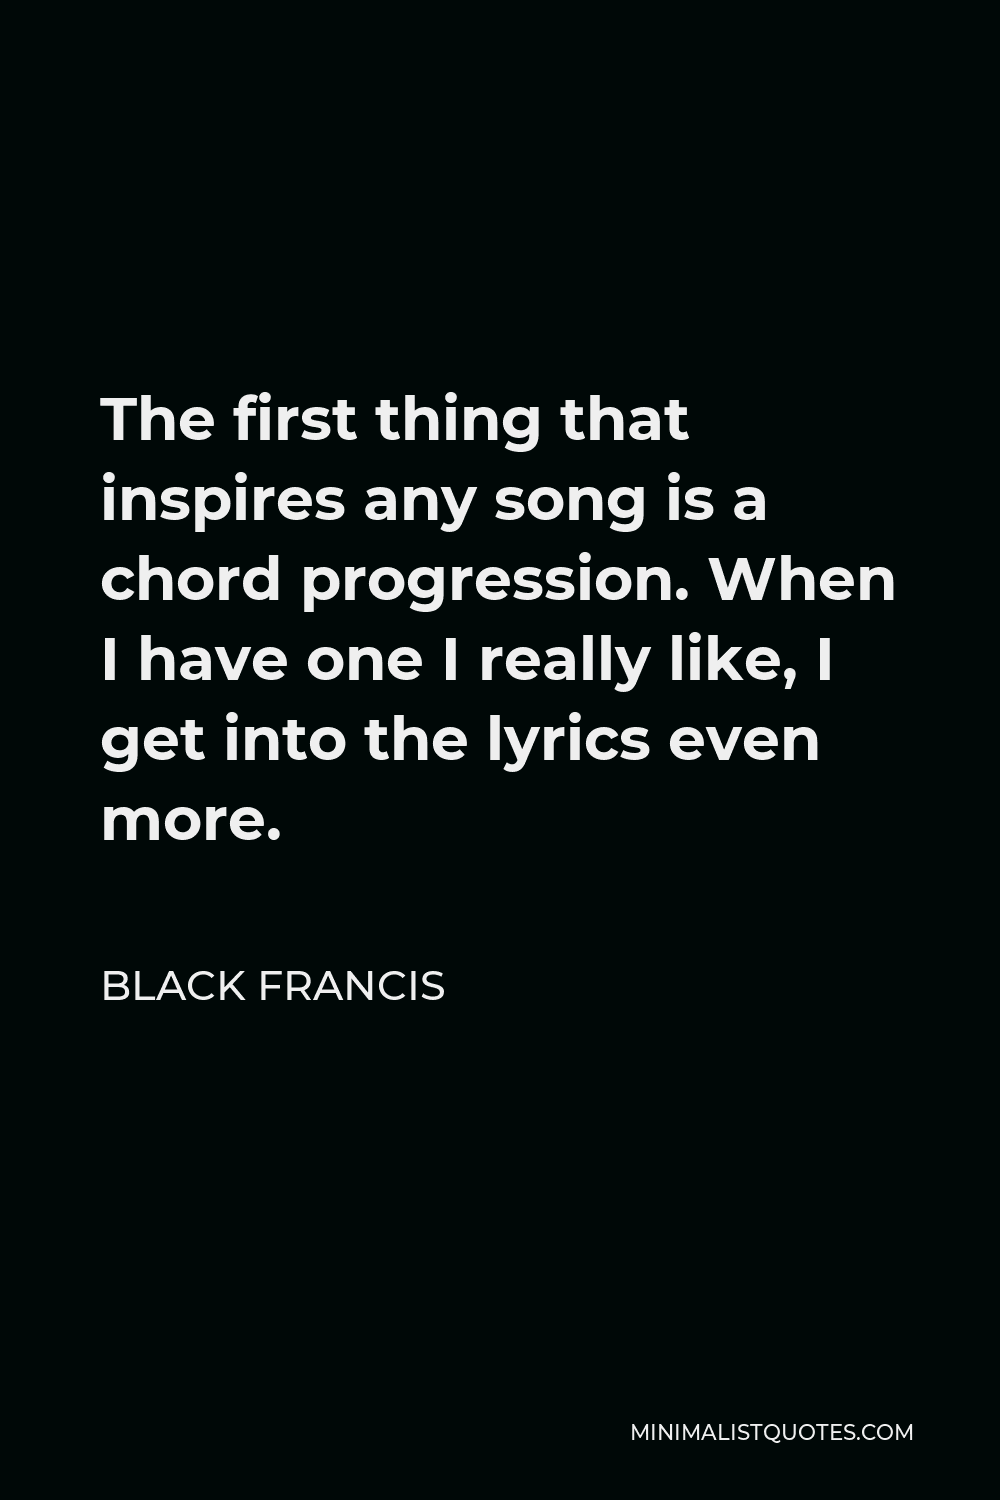 Black Francis Quote - The first thing that inspires any song is a chord progression. When I have one I really like, I get into the lyrics even more.